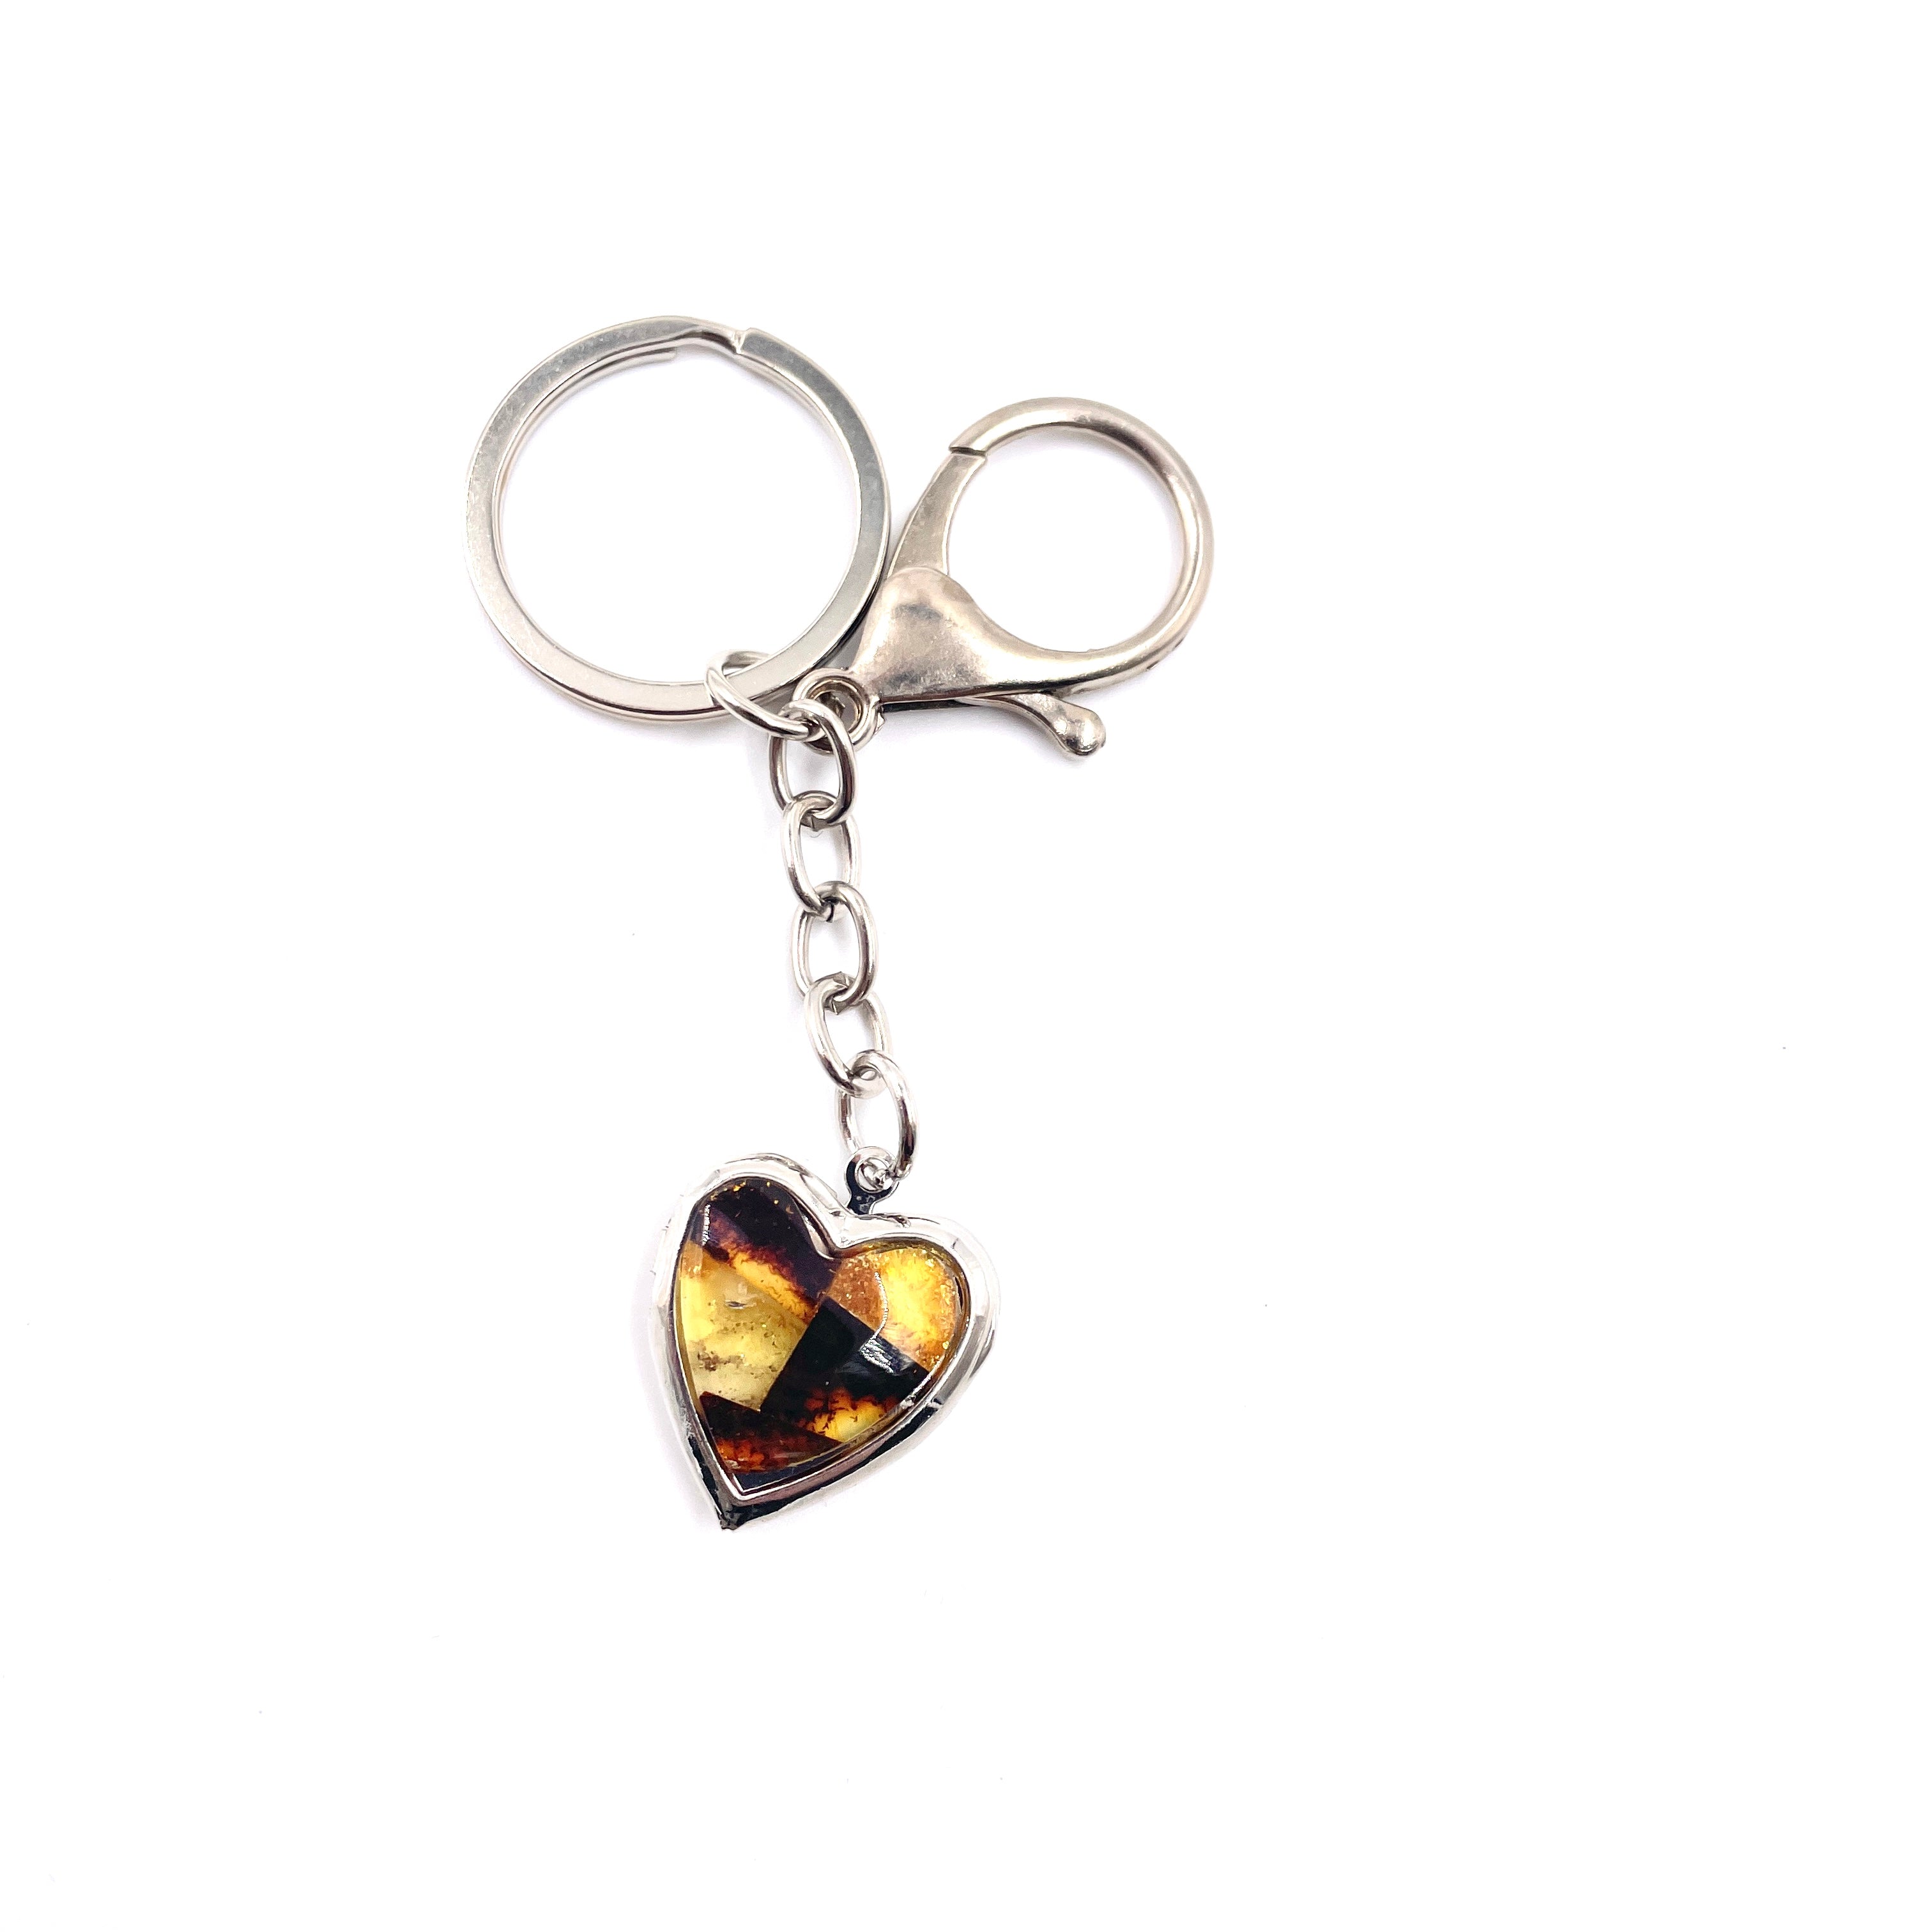 Heart-shaped keychain decorated with amber mosaic